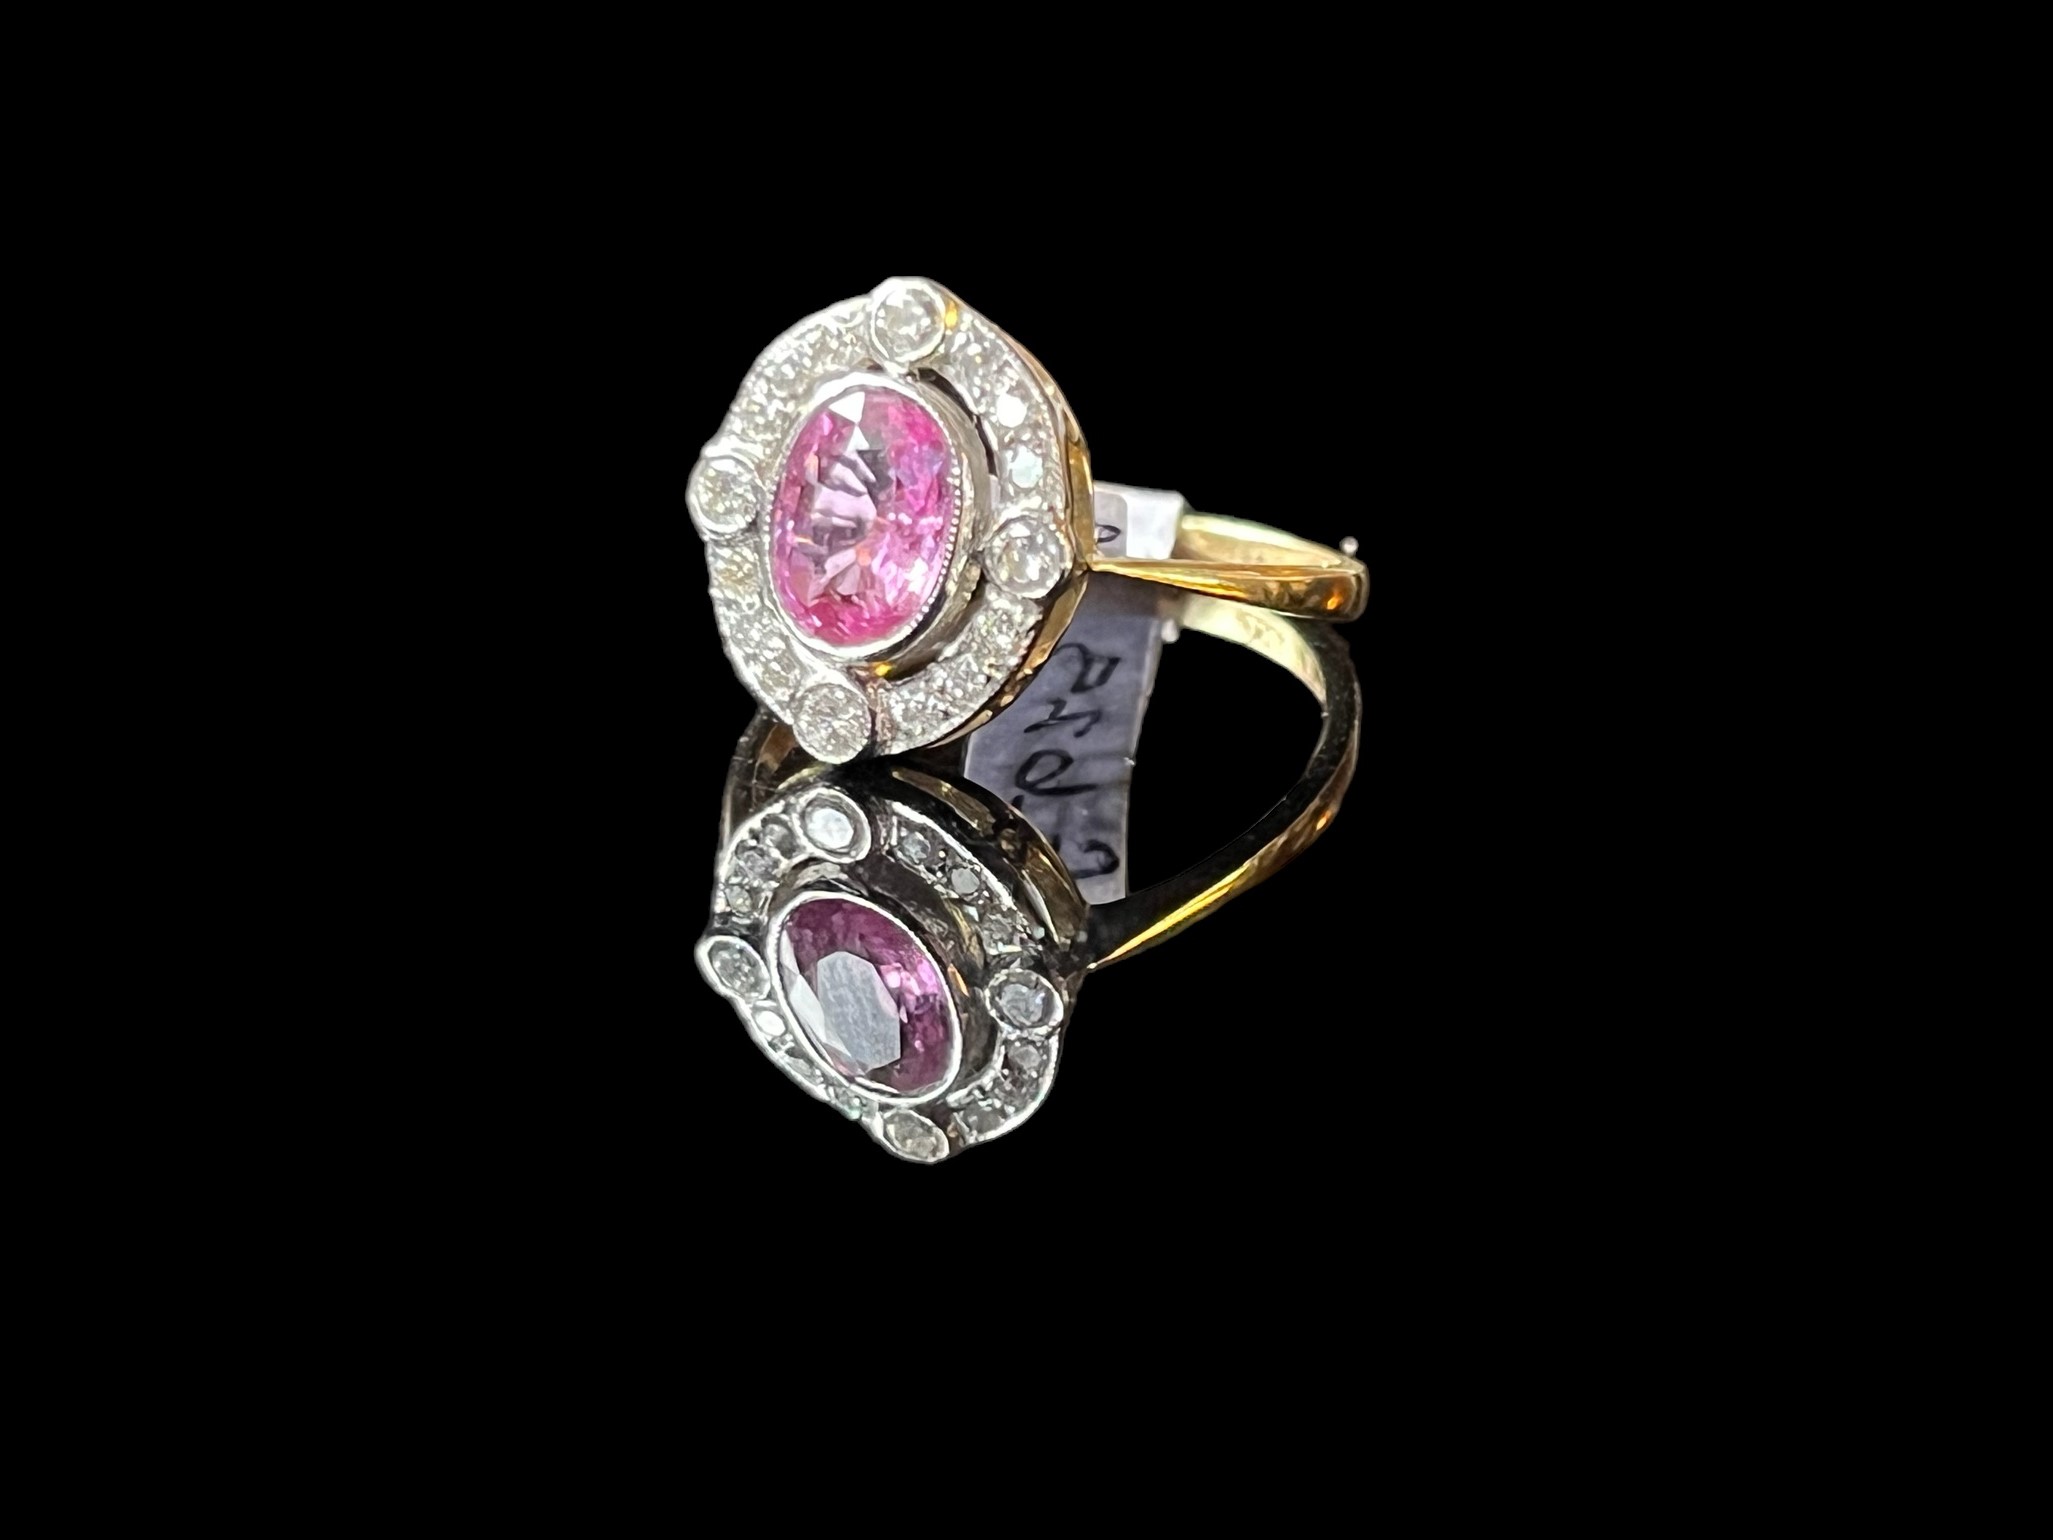 A pink sapphire and diamond ring, set with an oval pink sapphire weighing 0.60 carats, within a